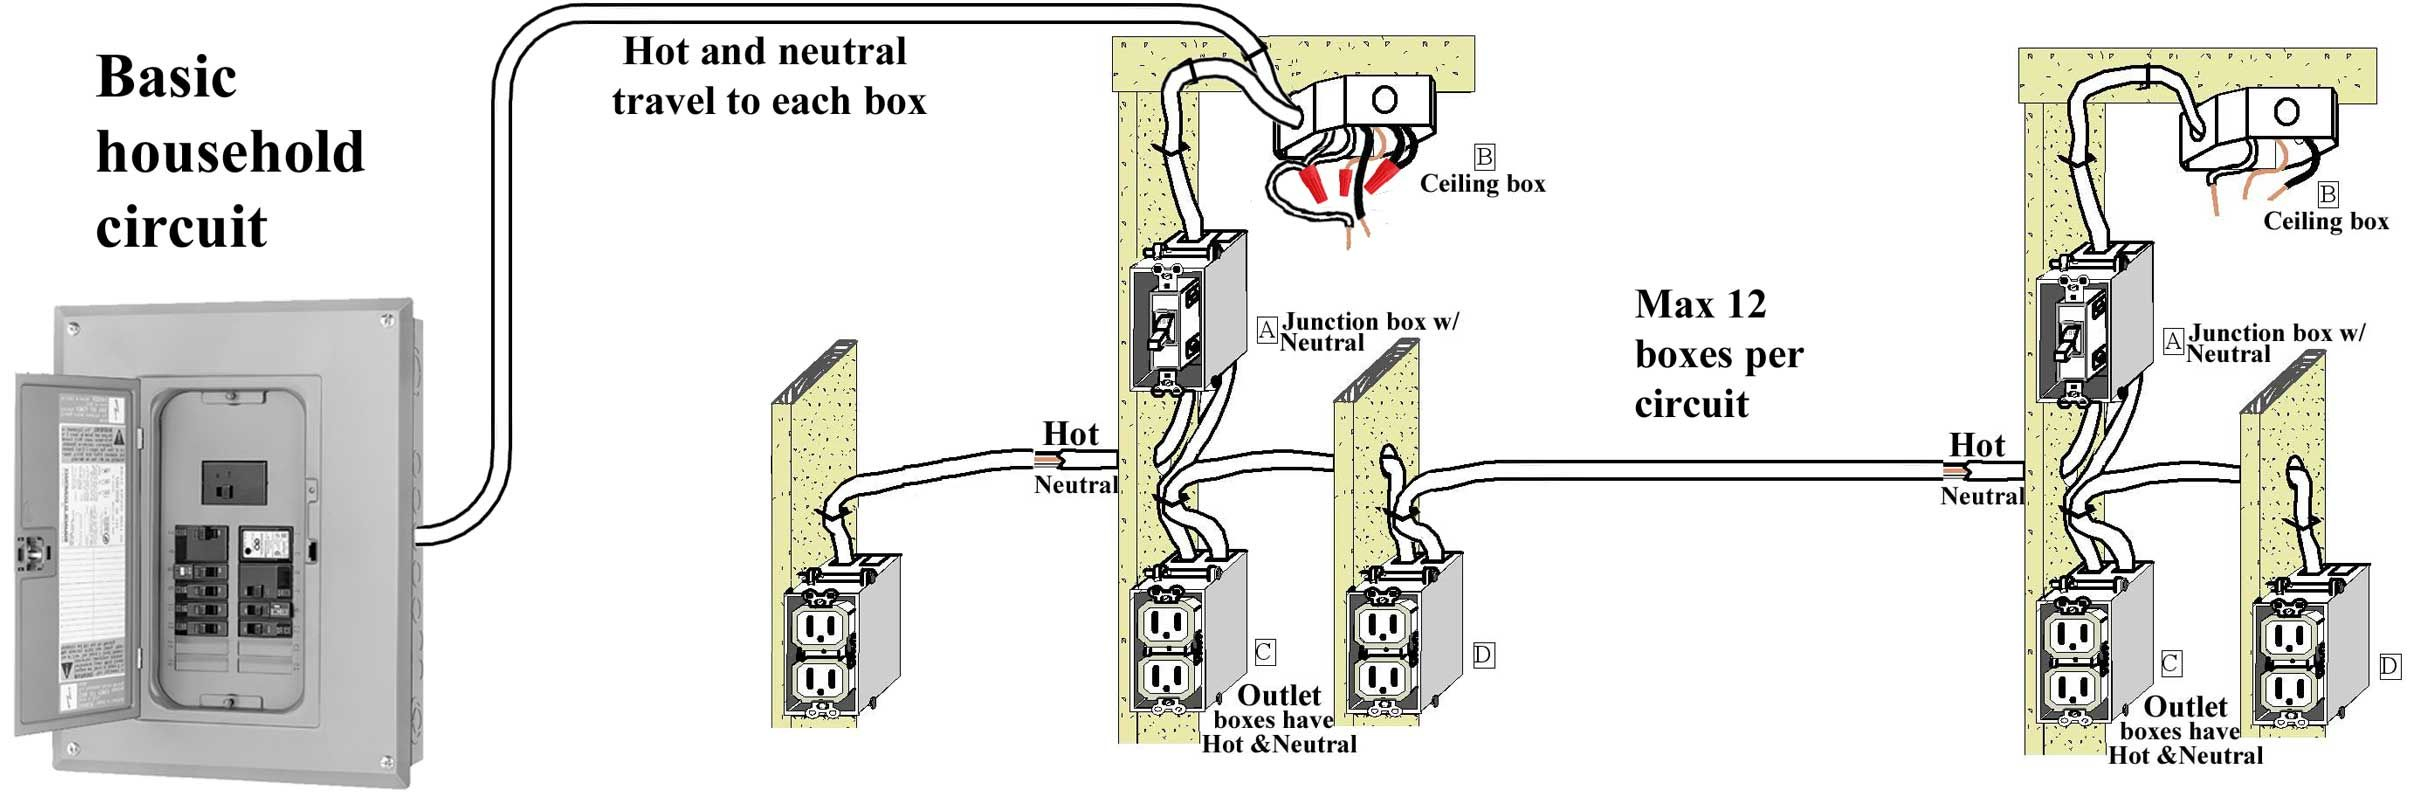 Basic House Wiring Diagrams - Today Wiring Diagram - Home Wiring Diagram